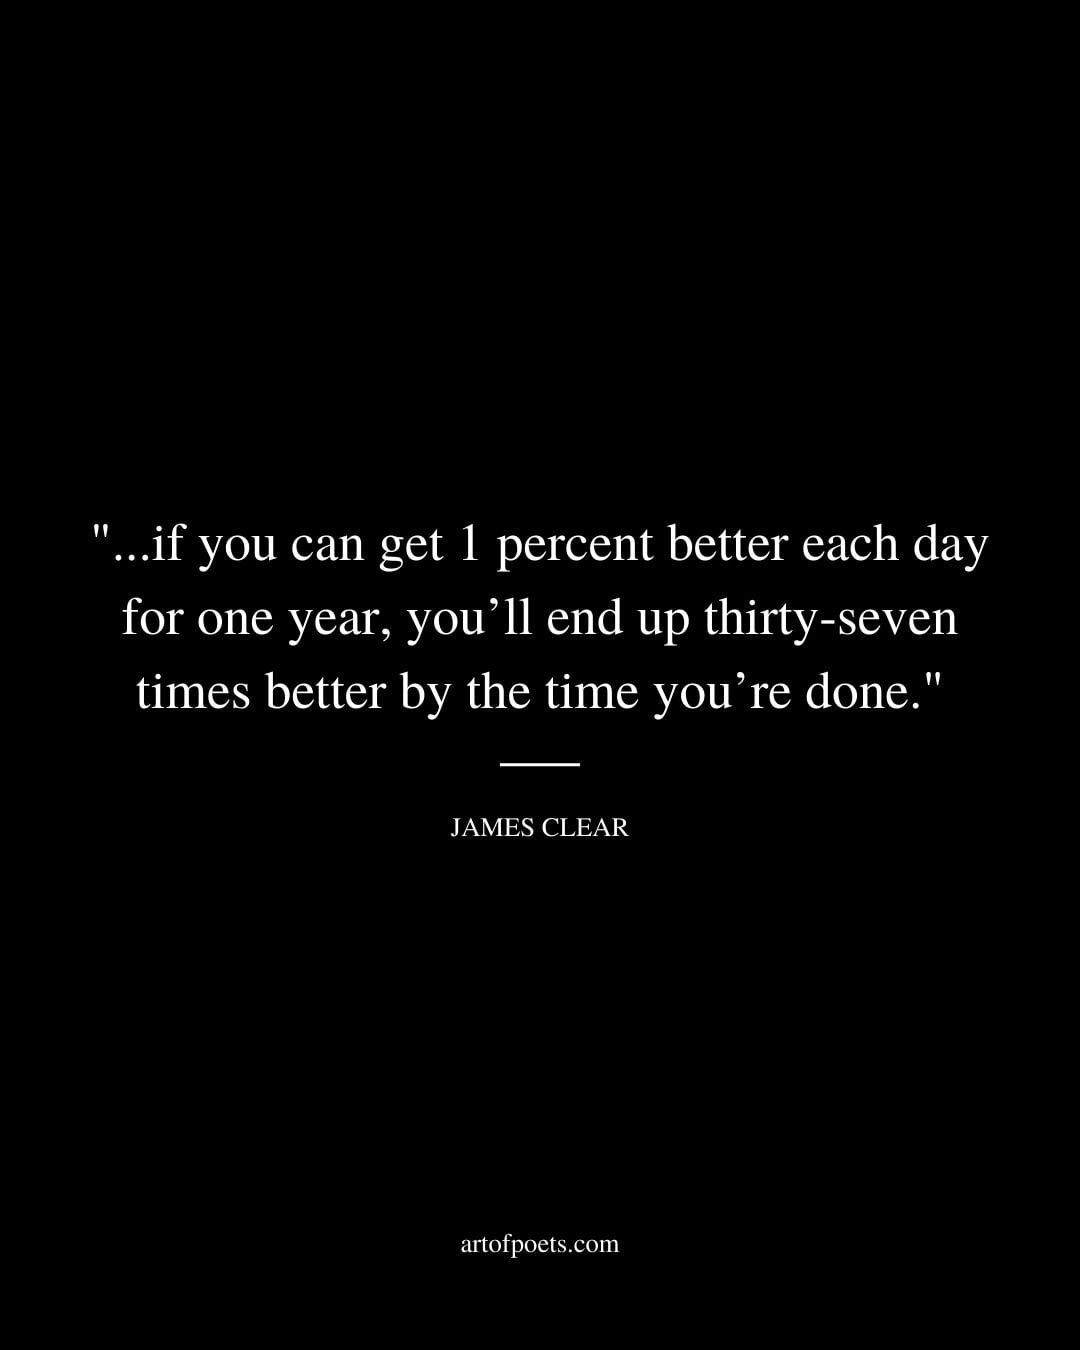 ″.if you can get 1 percent better each day for one year youll end up thirty seven times better by the time youre done